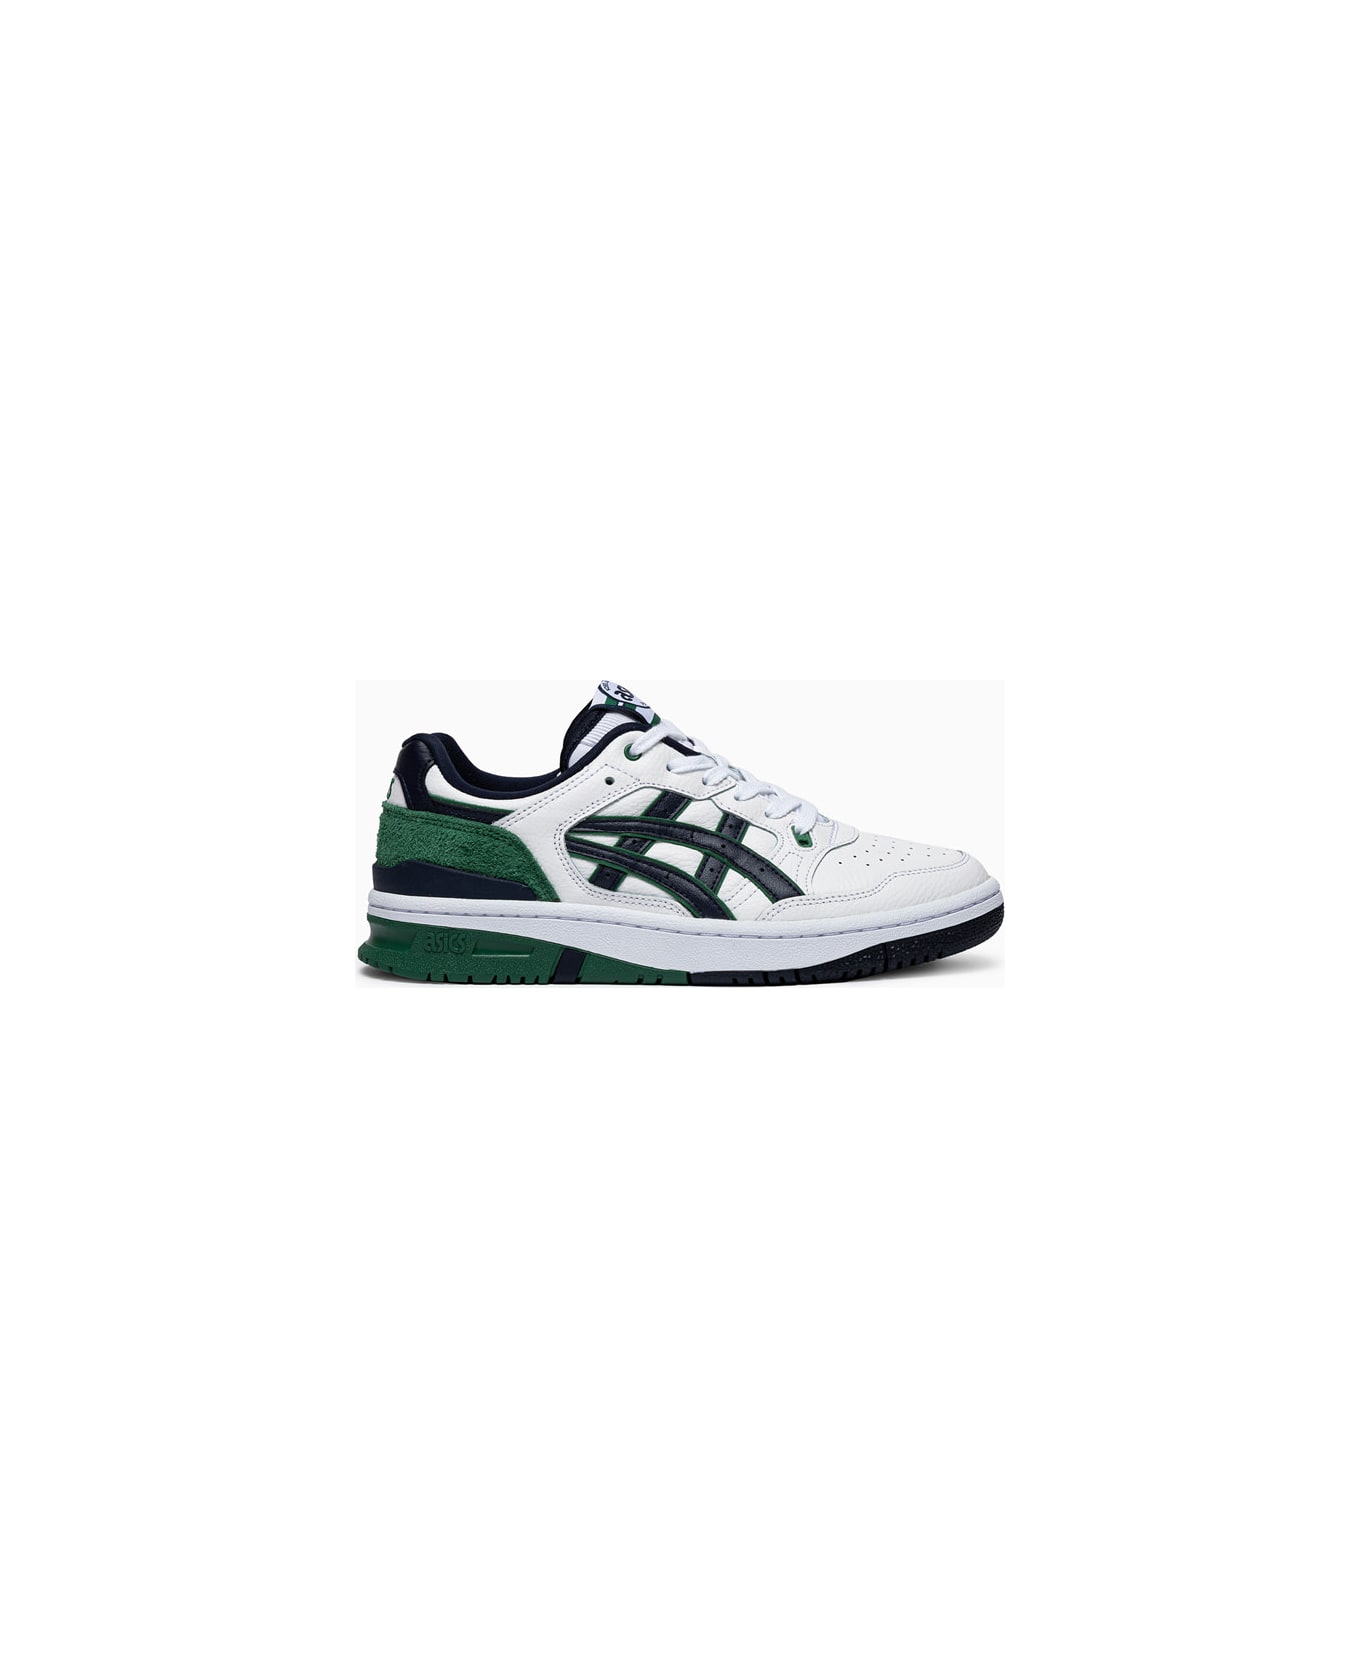 Asics Ex89 Sneakers 1203a268 - White